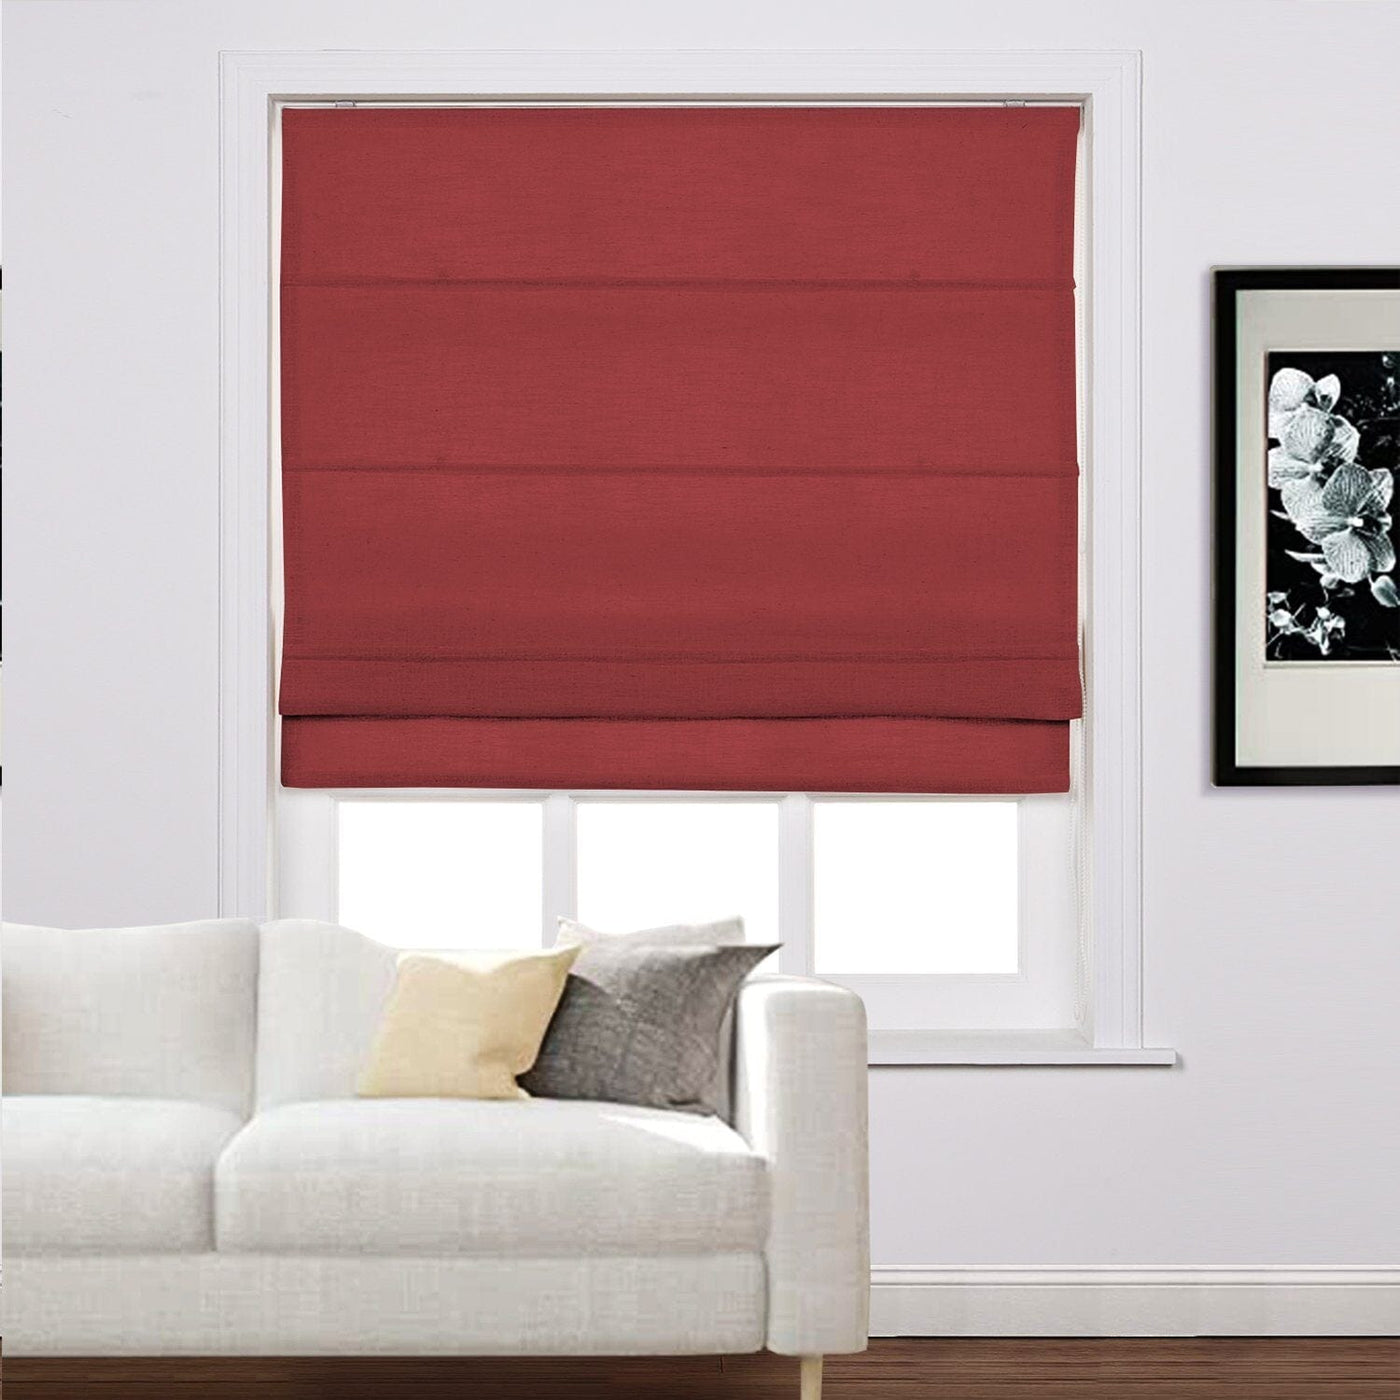 LIZ Linen Customized Roman Shade, Canvas Roman Shade with Loop Control, Kitchen Window Door Roman Shade, Install Hardware Included TWOPAGES CURTAINS Red Wine 1908-23 